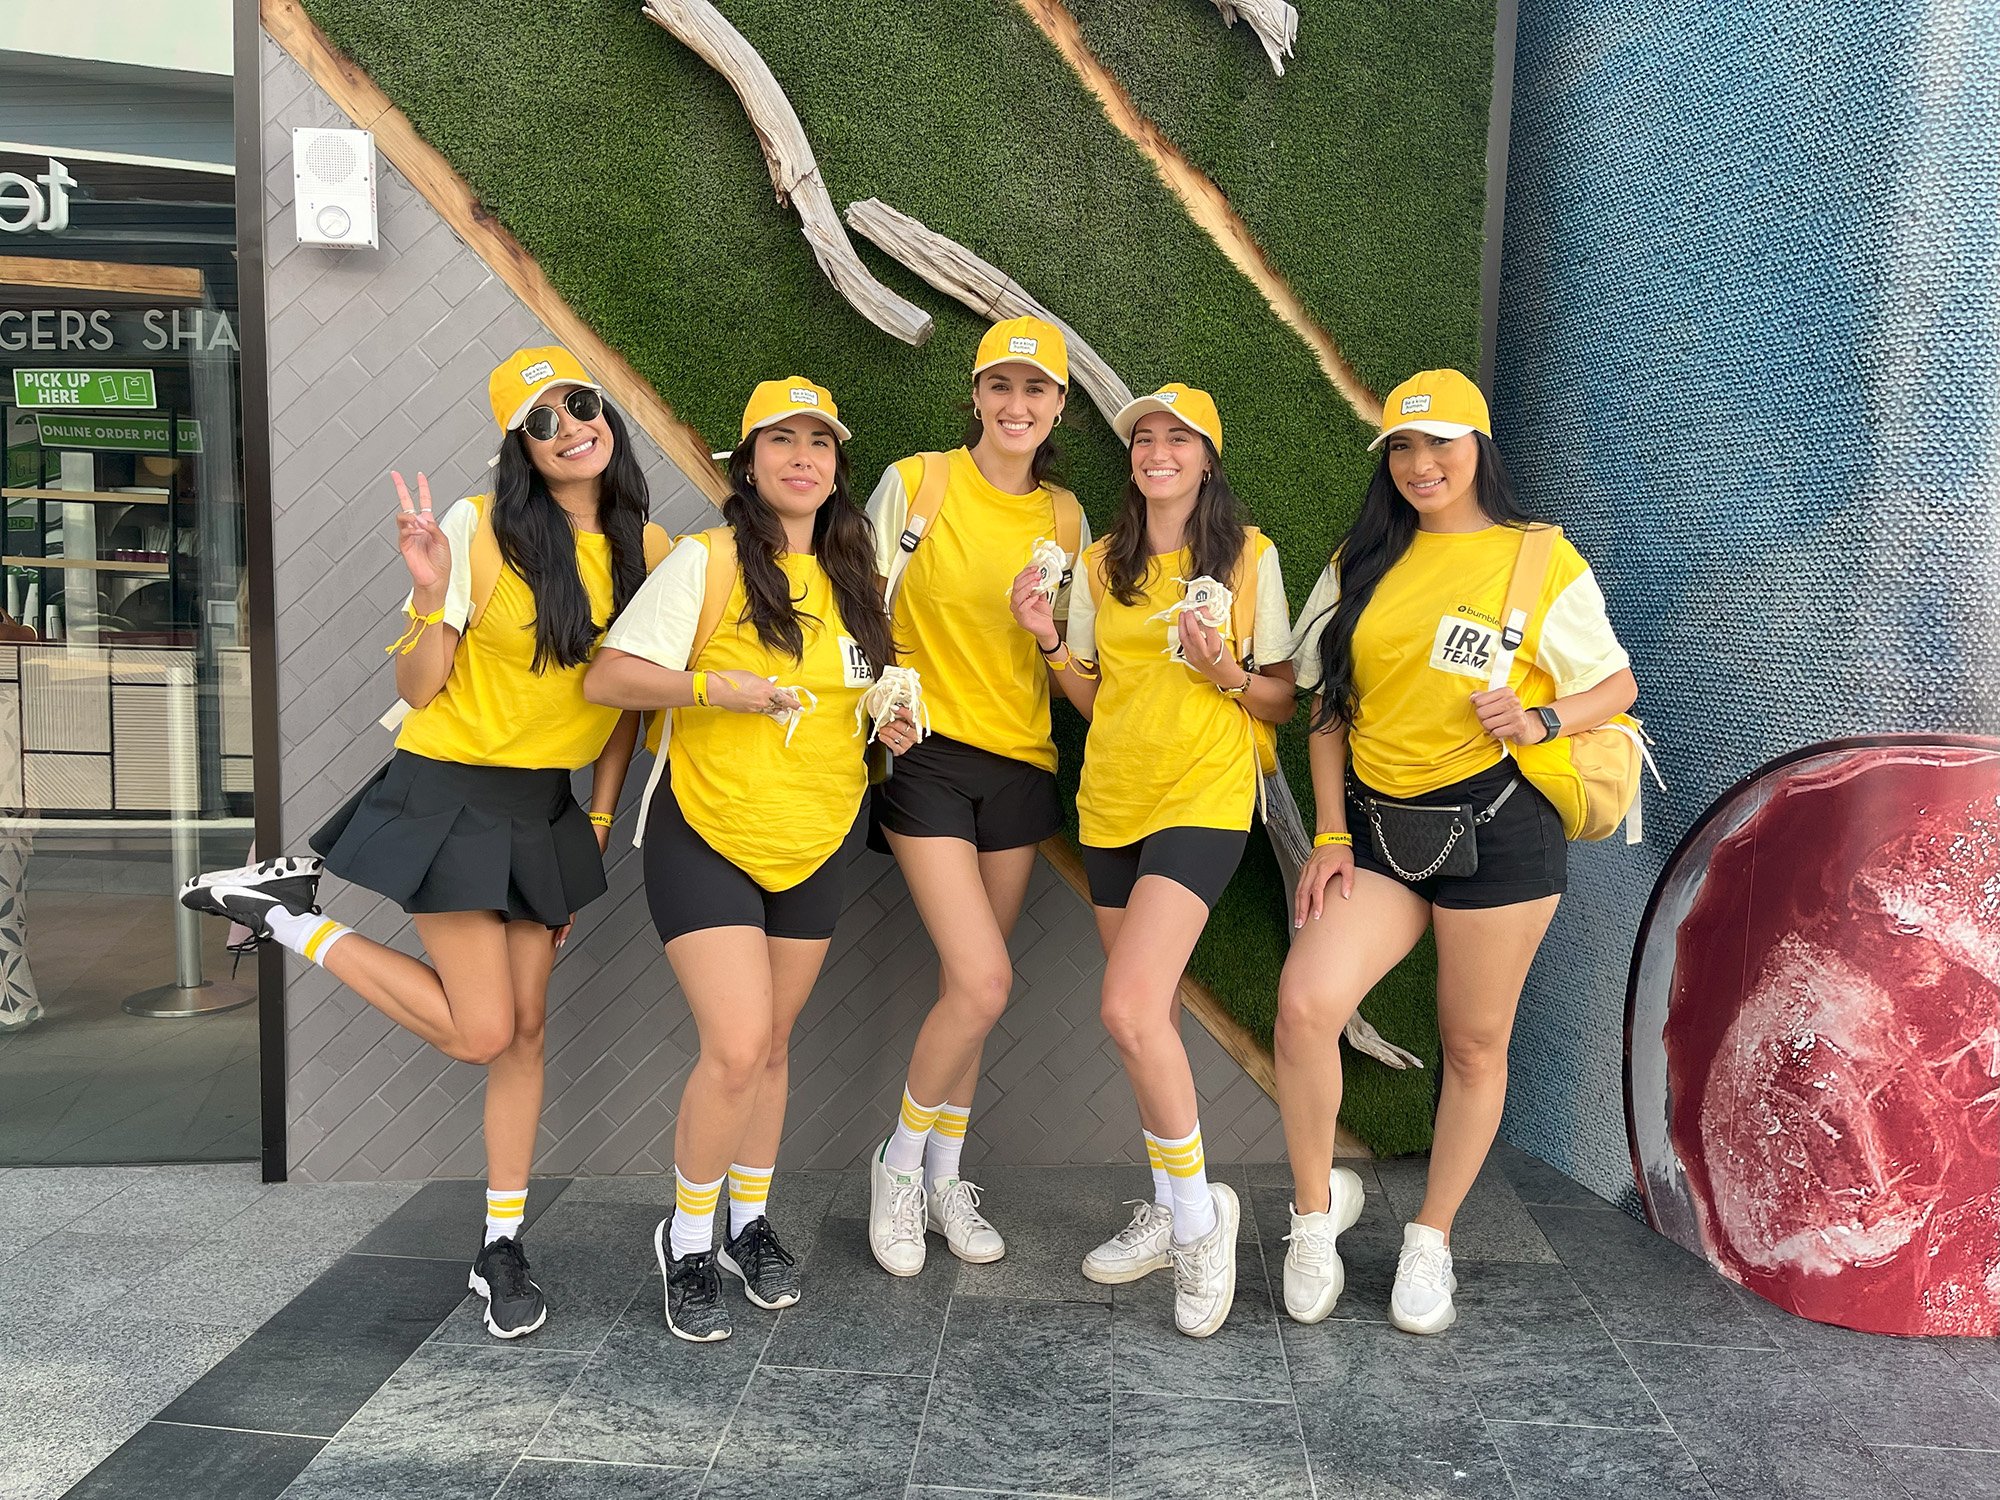 Event staffing and brand activation support for Bumble